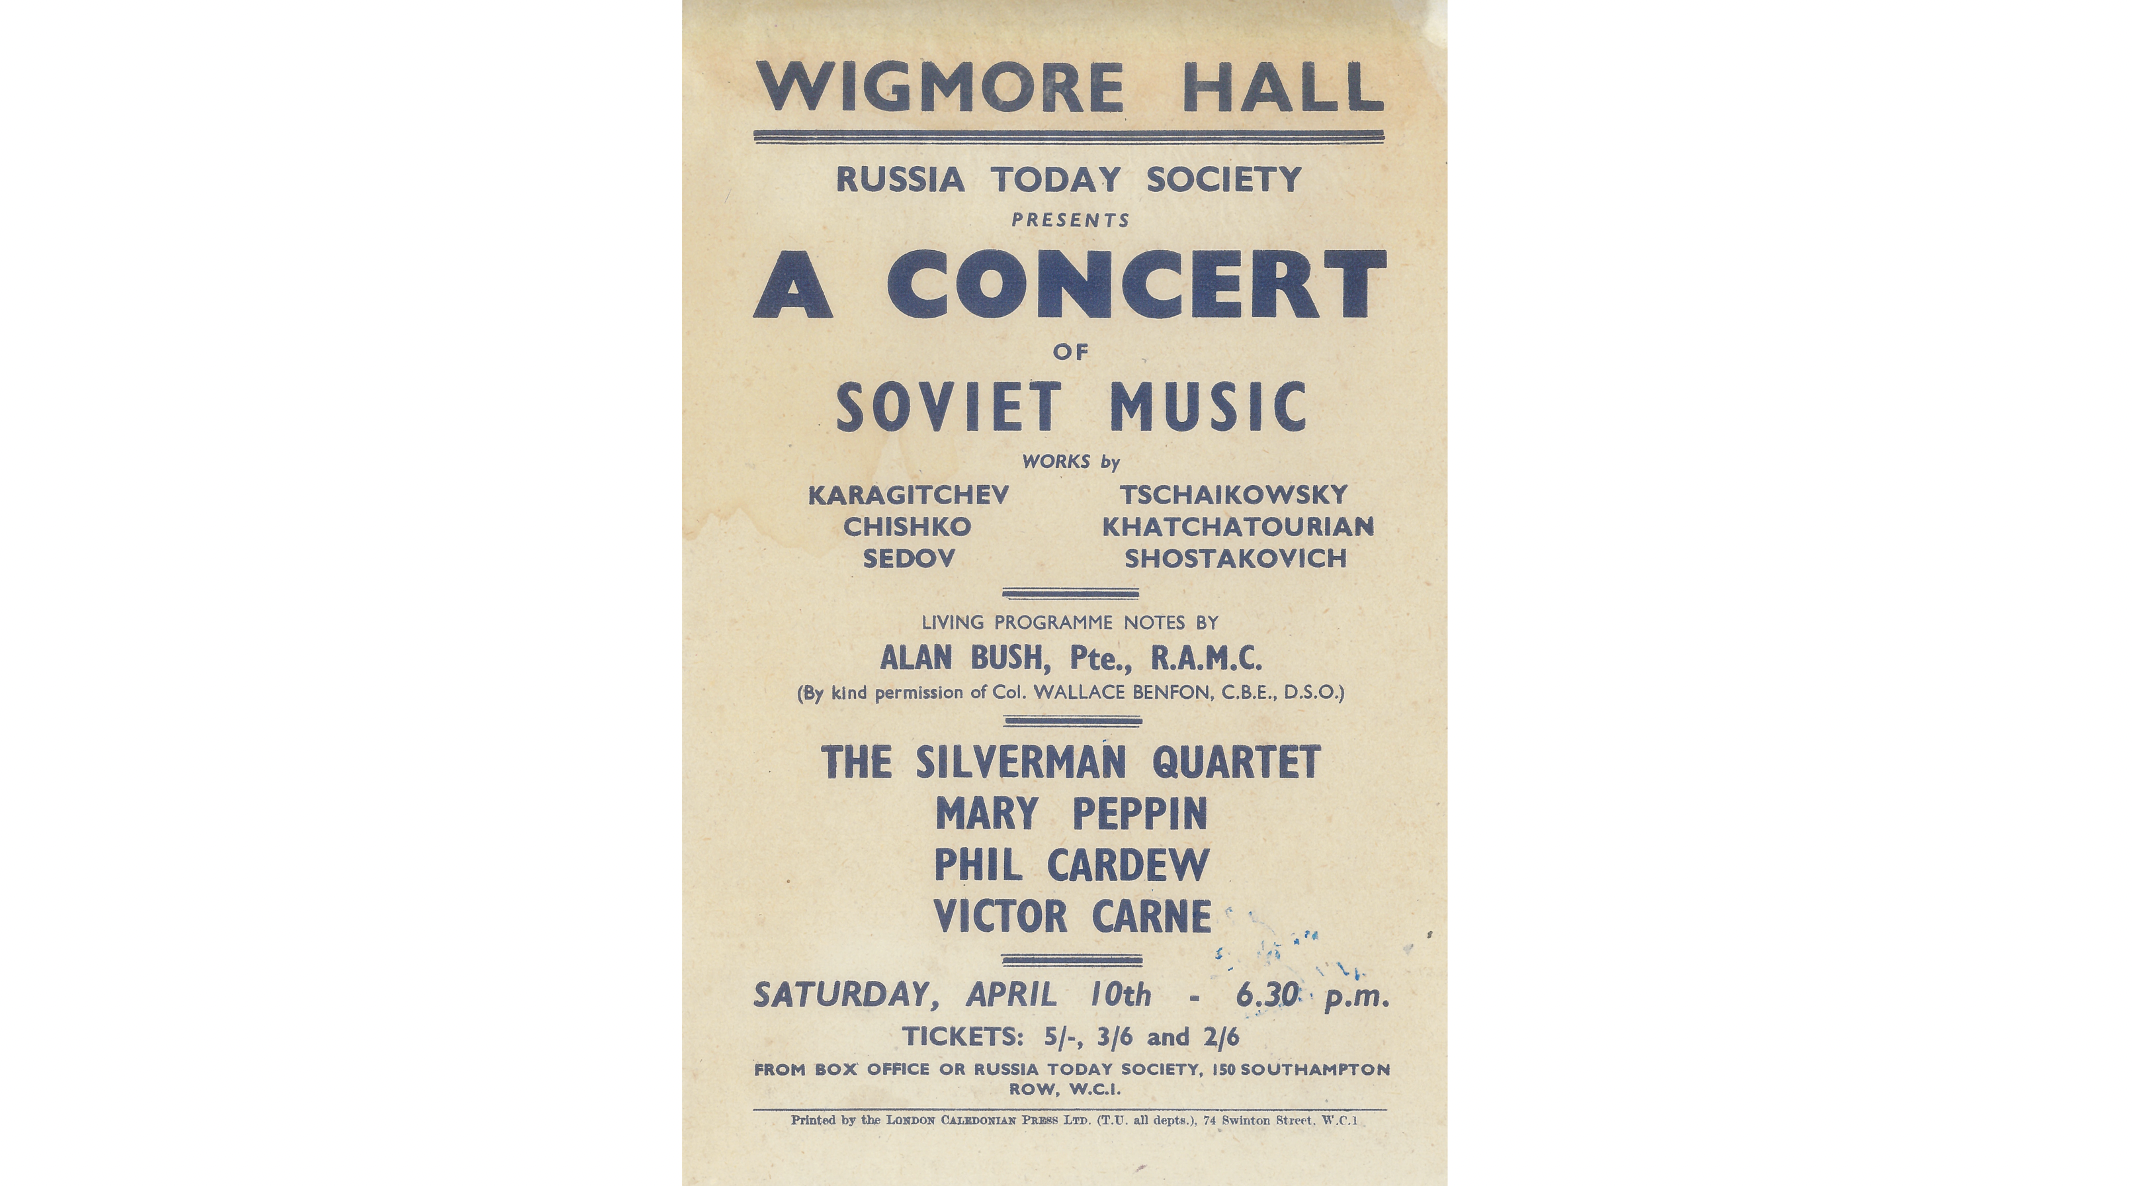 A flyer advertising in big bold letters “A Concert of Soviet Music” presented by Russia Today Society; concert at Wigmore Hall, on Saturday April 10th.